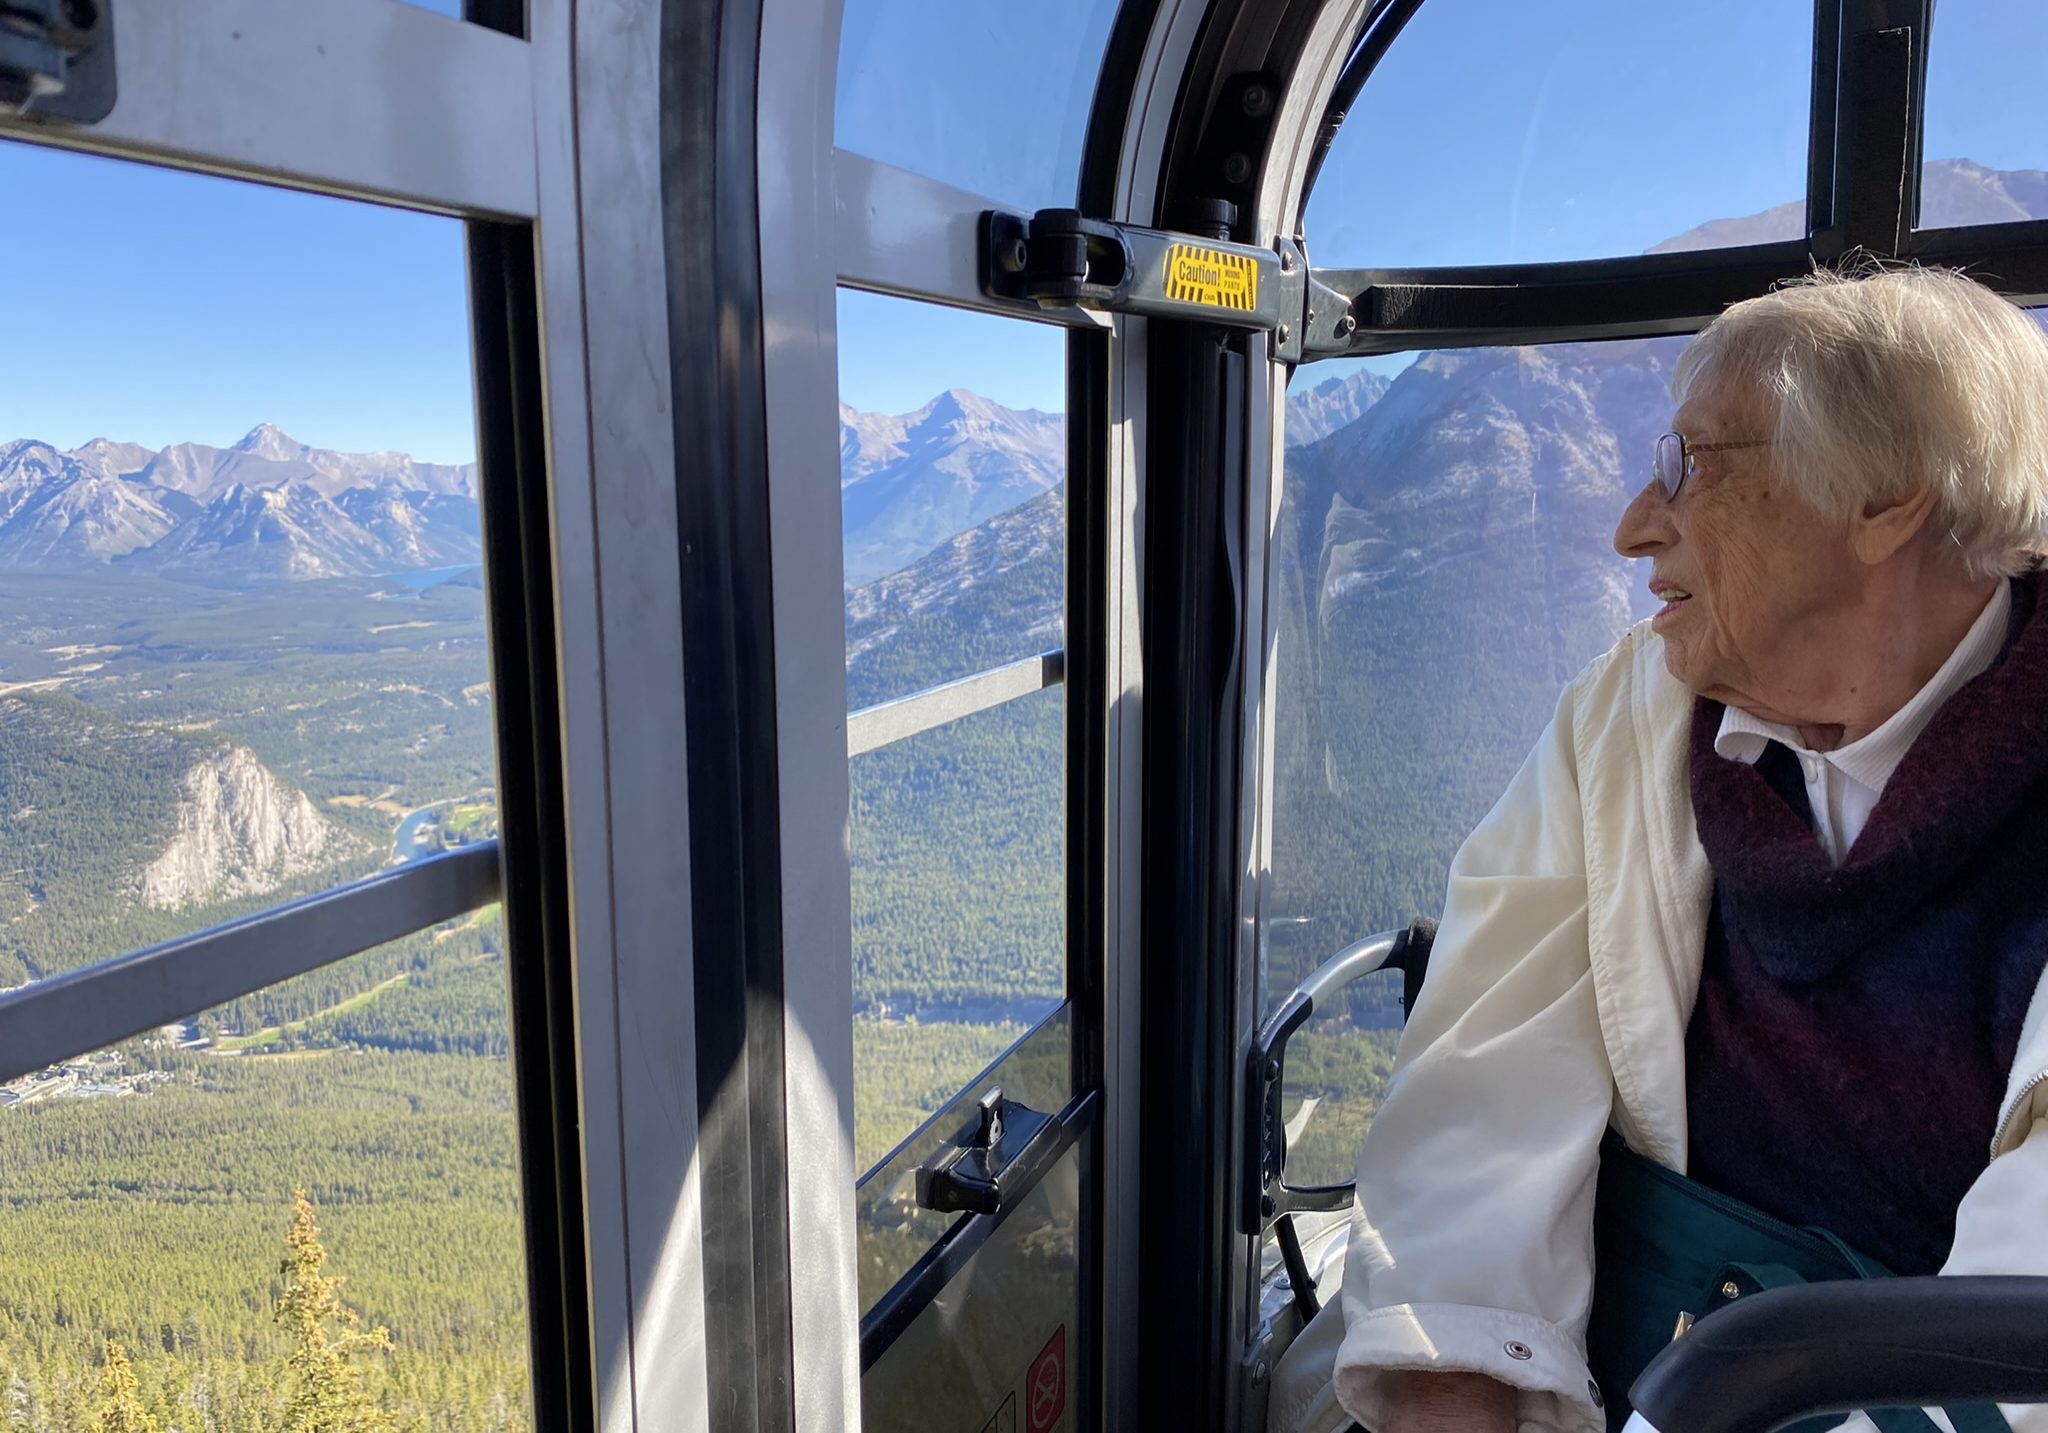 Christa enjoys her gondola ride up to the mountains in Banff.